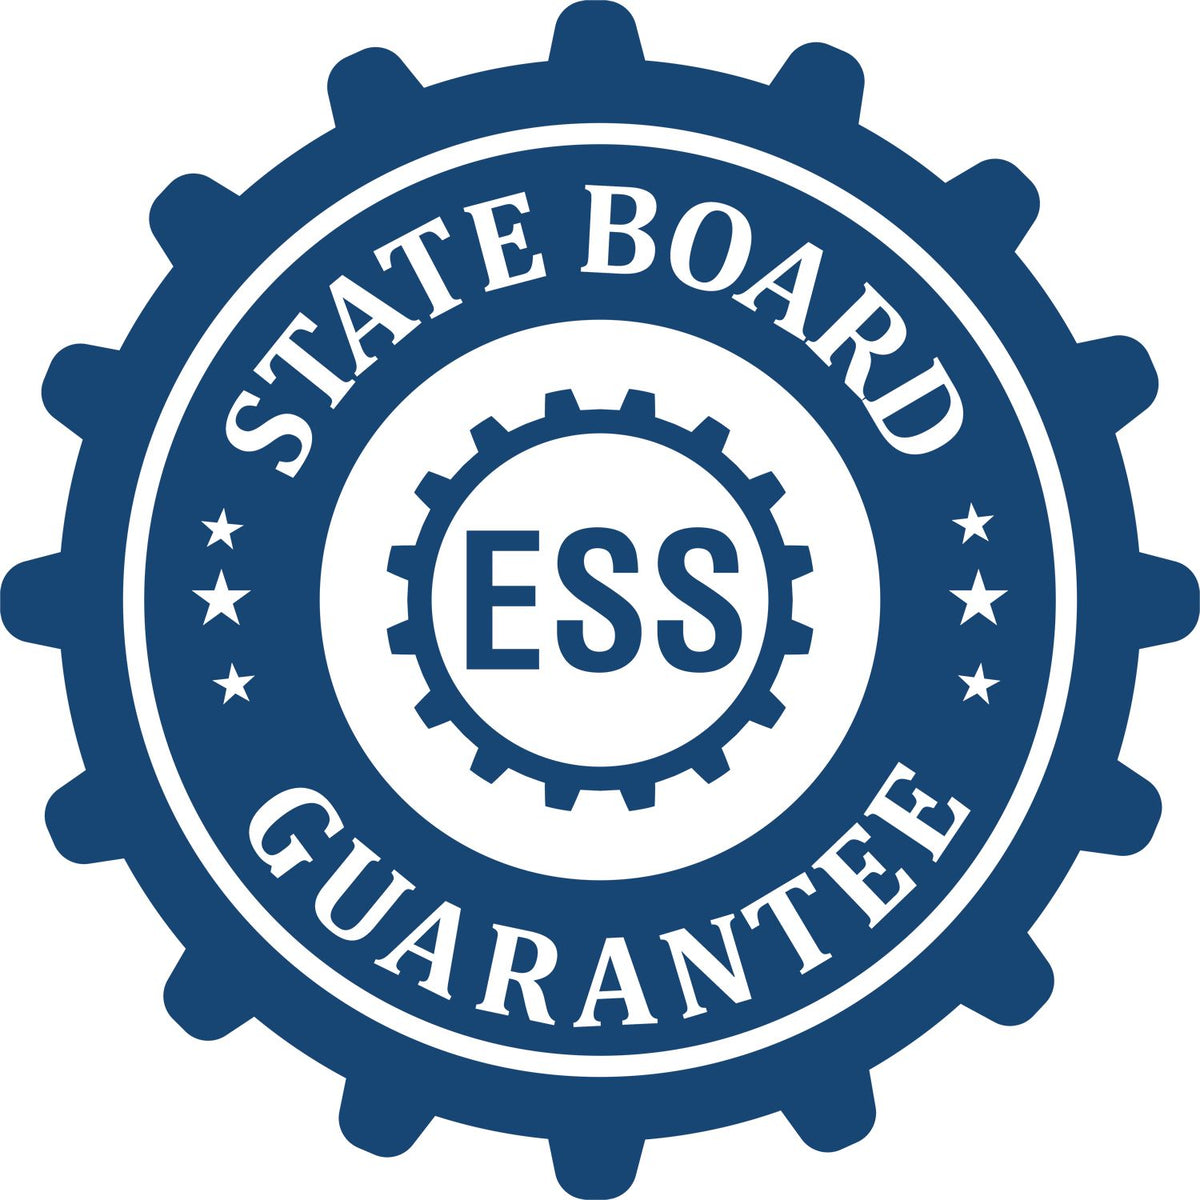 An emblem in a gear shape illustrating a state board guarantee for the Super Slim Montana Notary Public Stamp product.